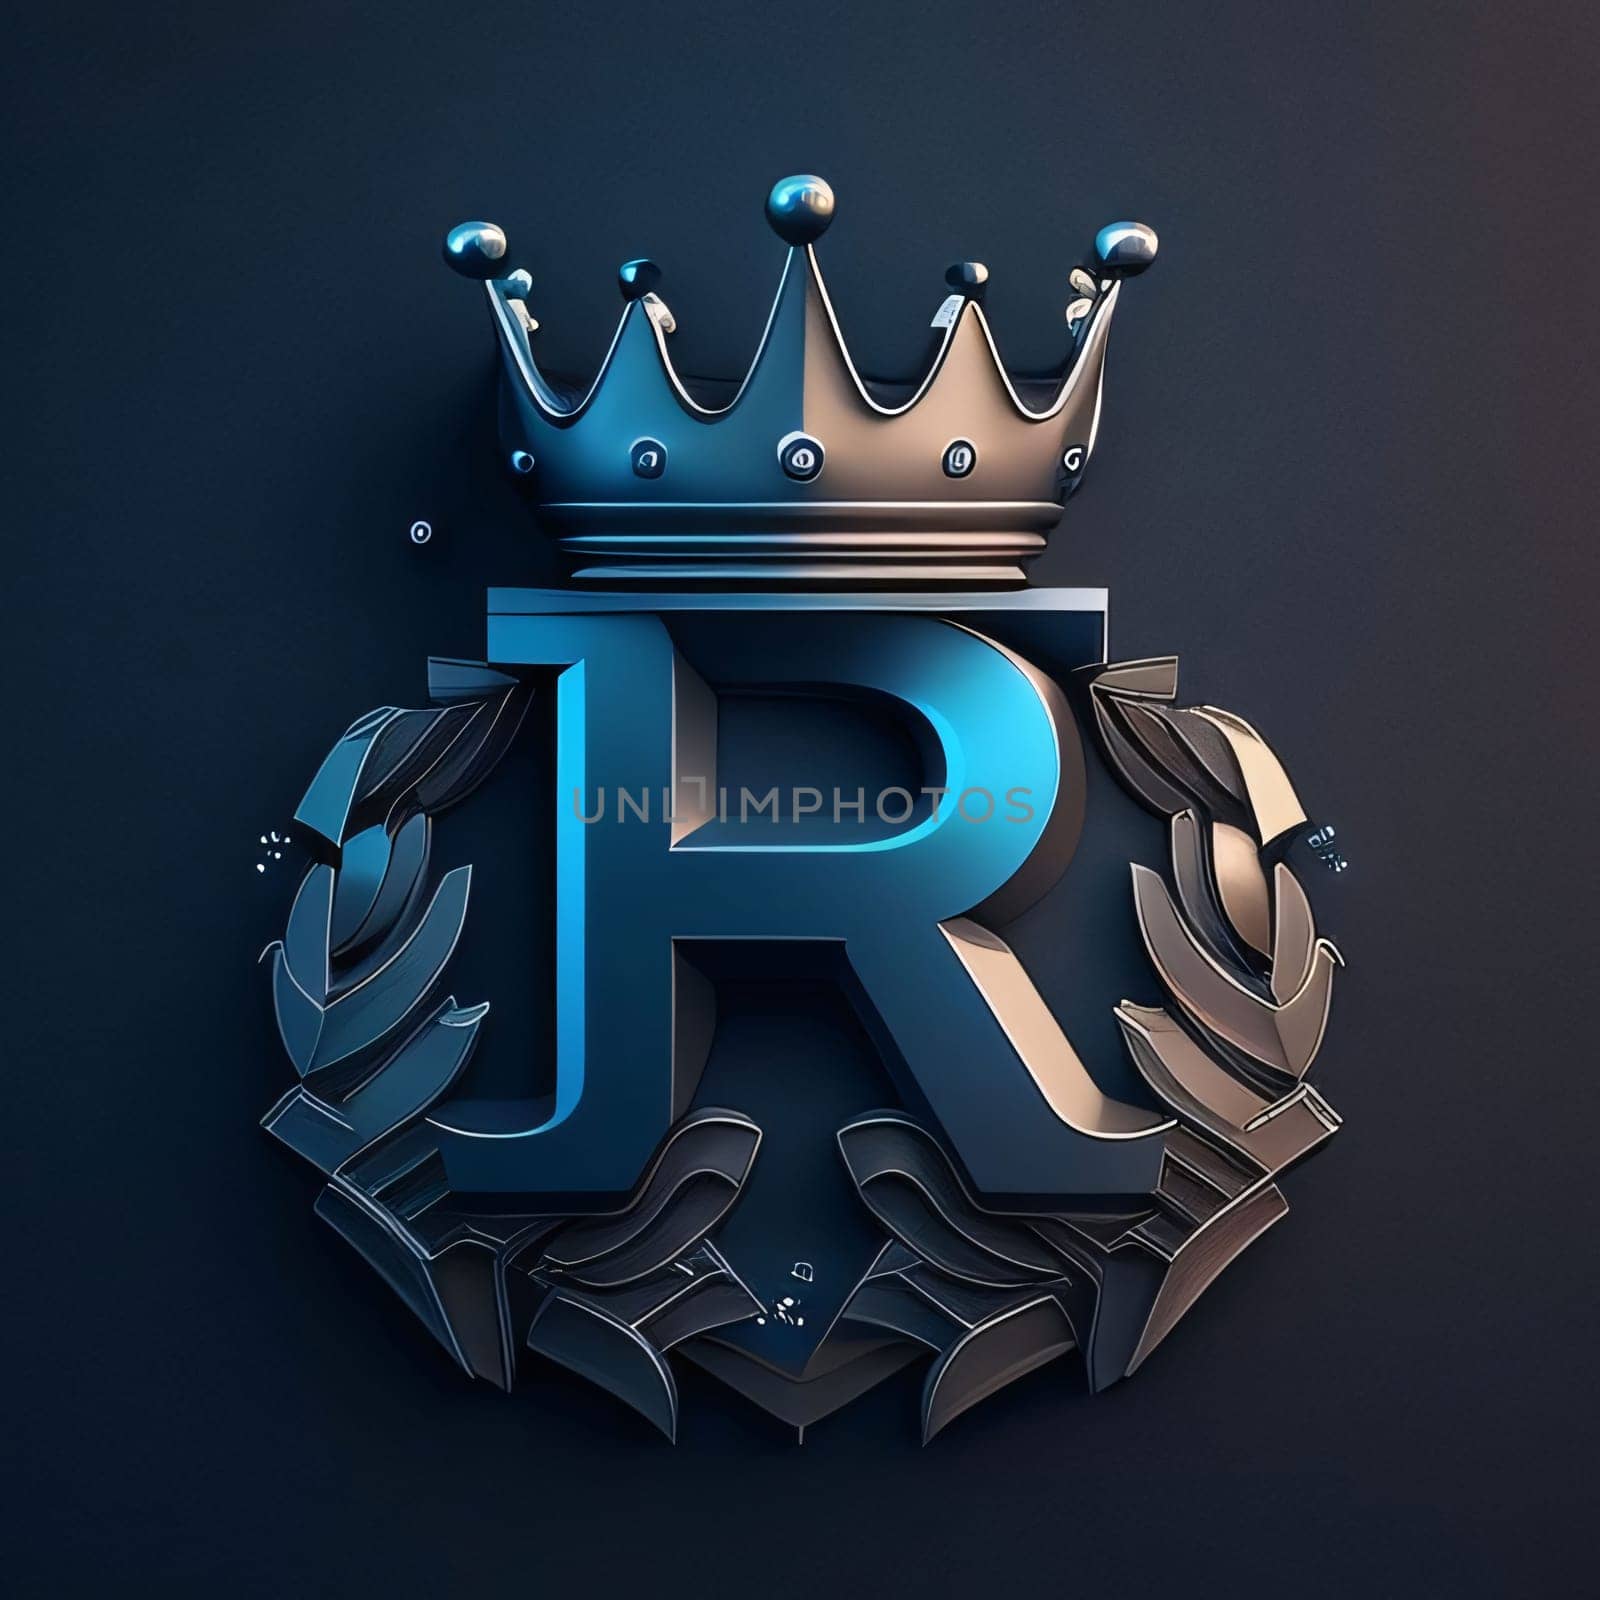 Graphic alphabet letters: 3d rendering of letter R in the form of a shield with crown